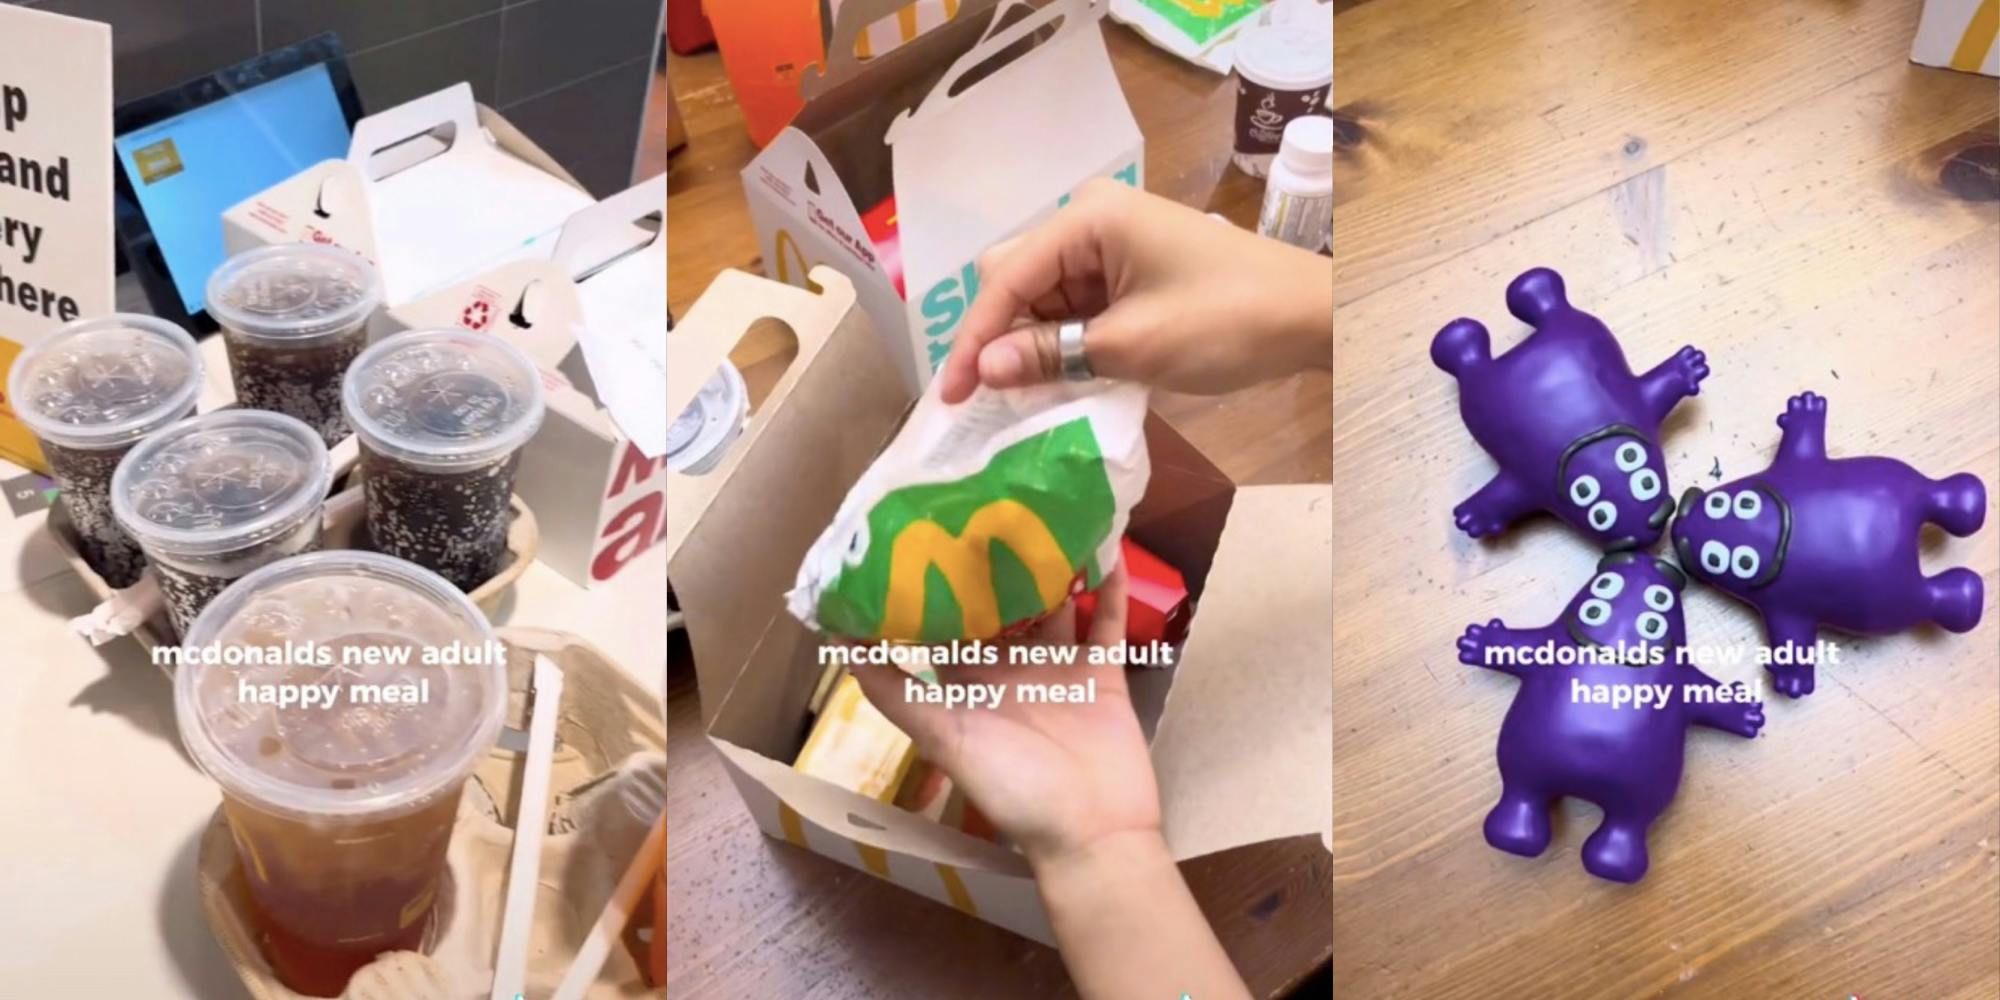 Customer Shares McDonald's New Adult Happy Meal In Viral Video